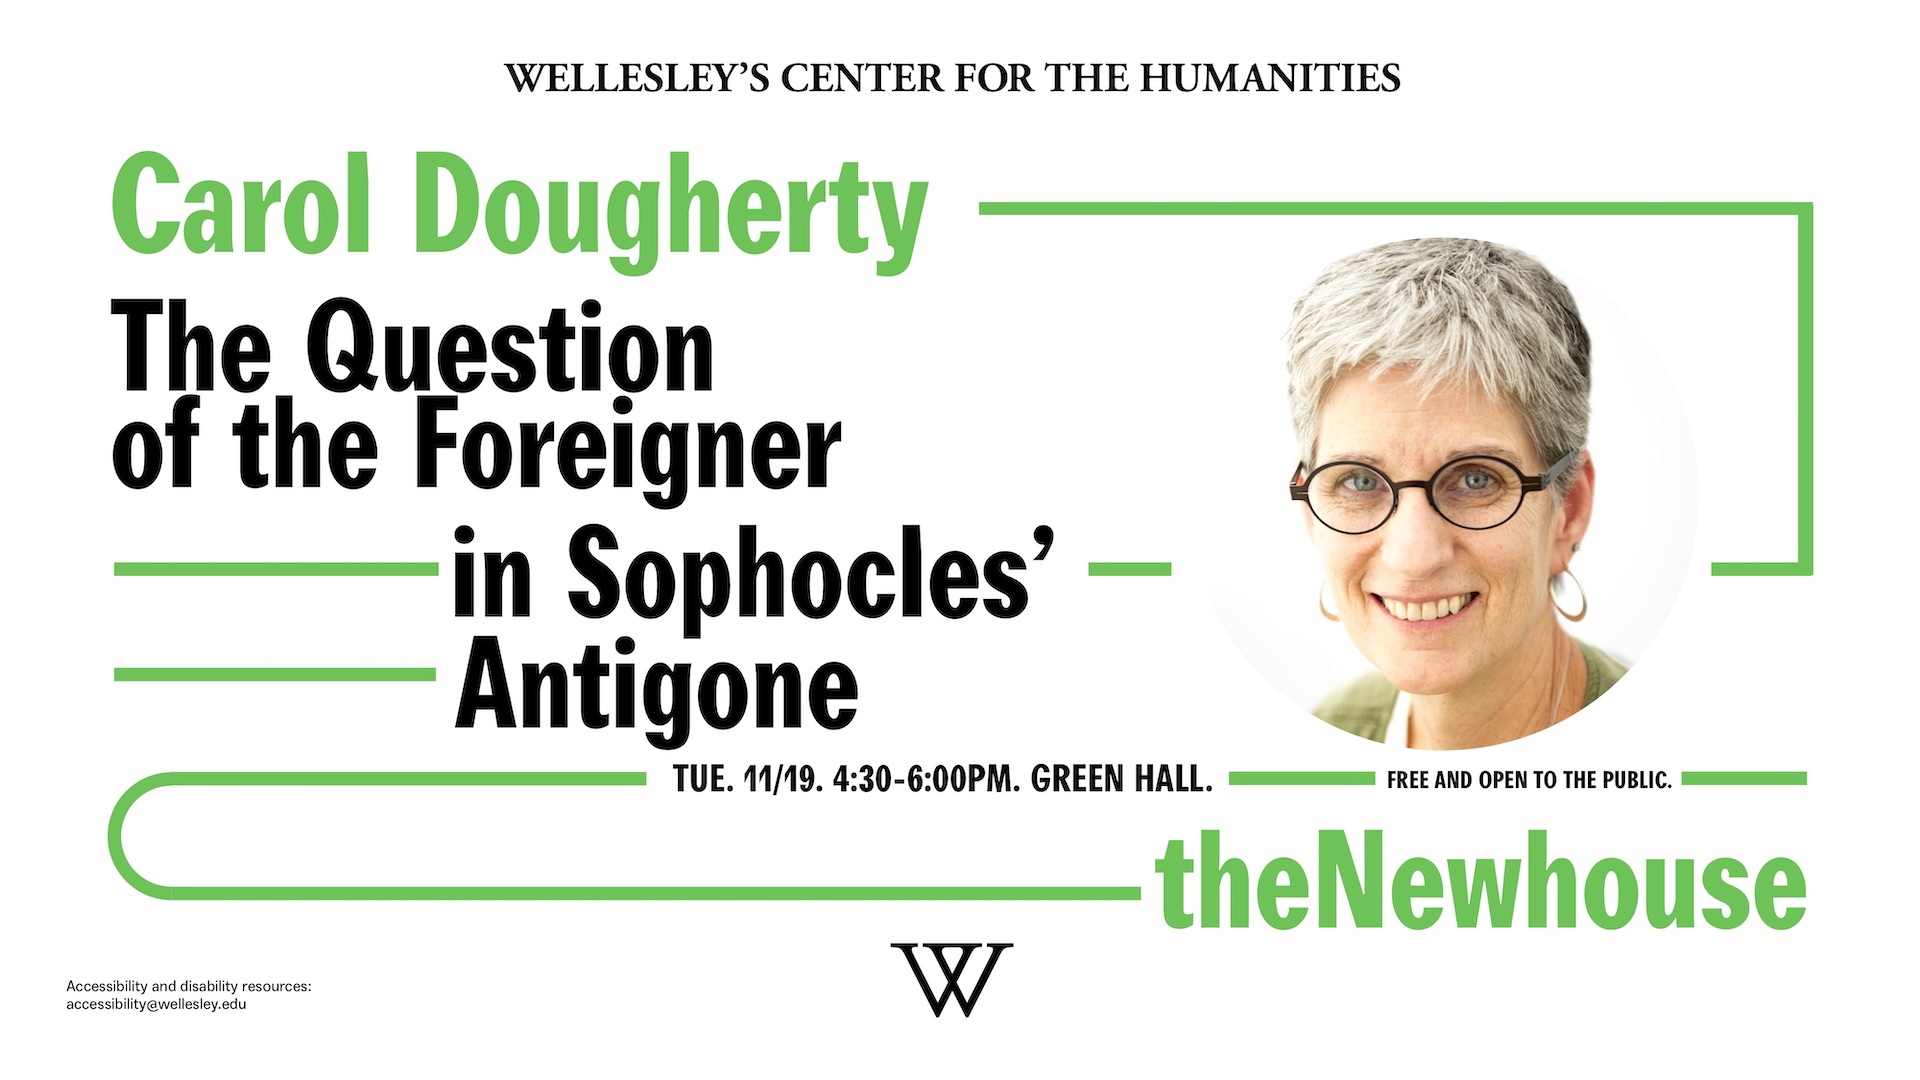 Carol Dougherty: The Question of the Foreigner in Sophocles' Antigone - 11/19/2019